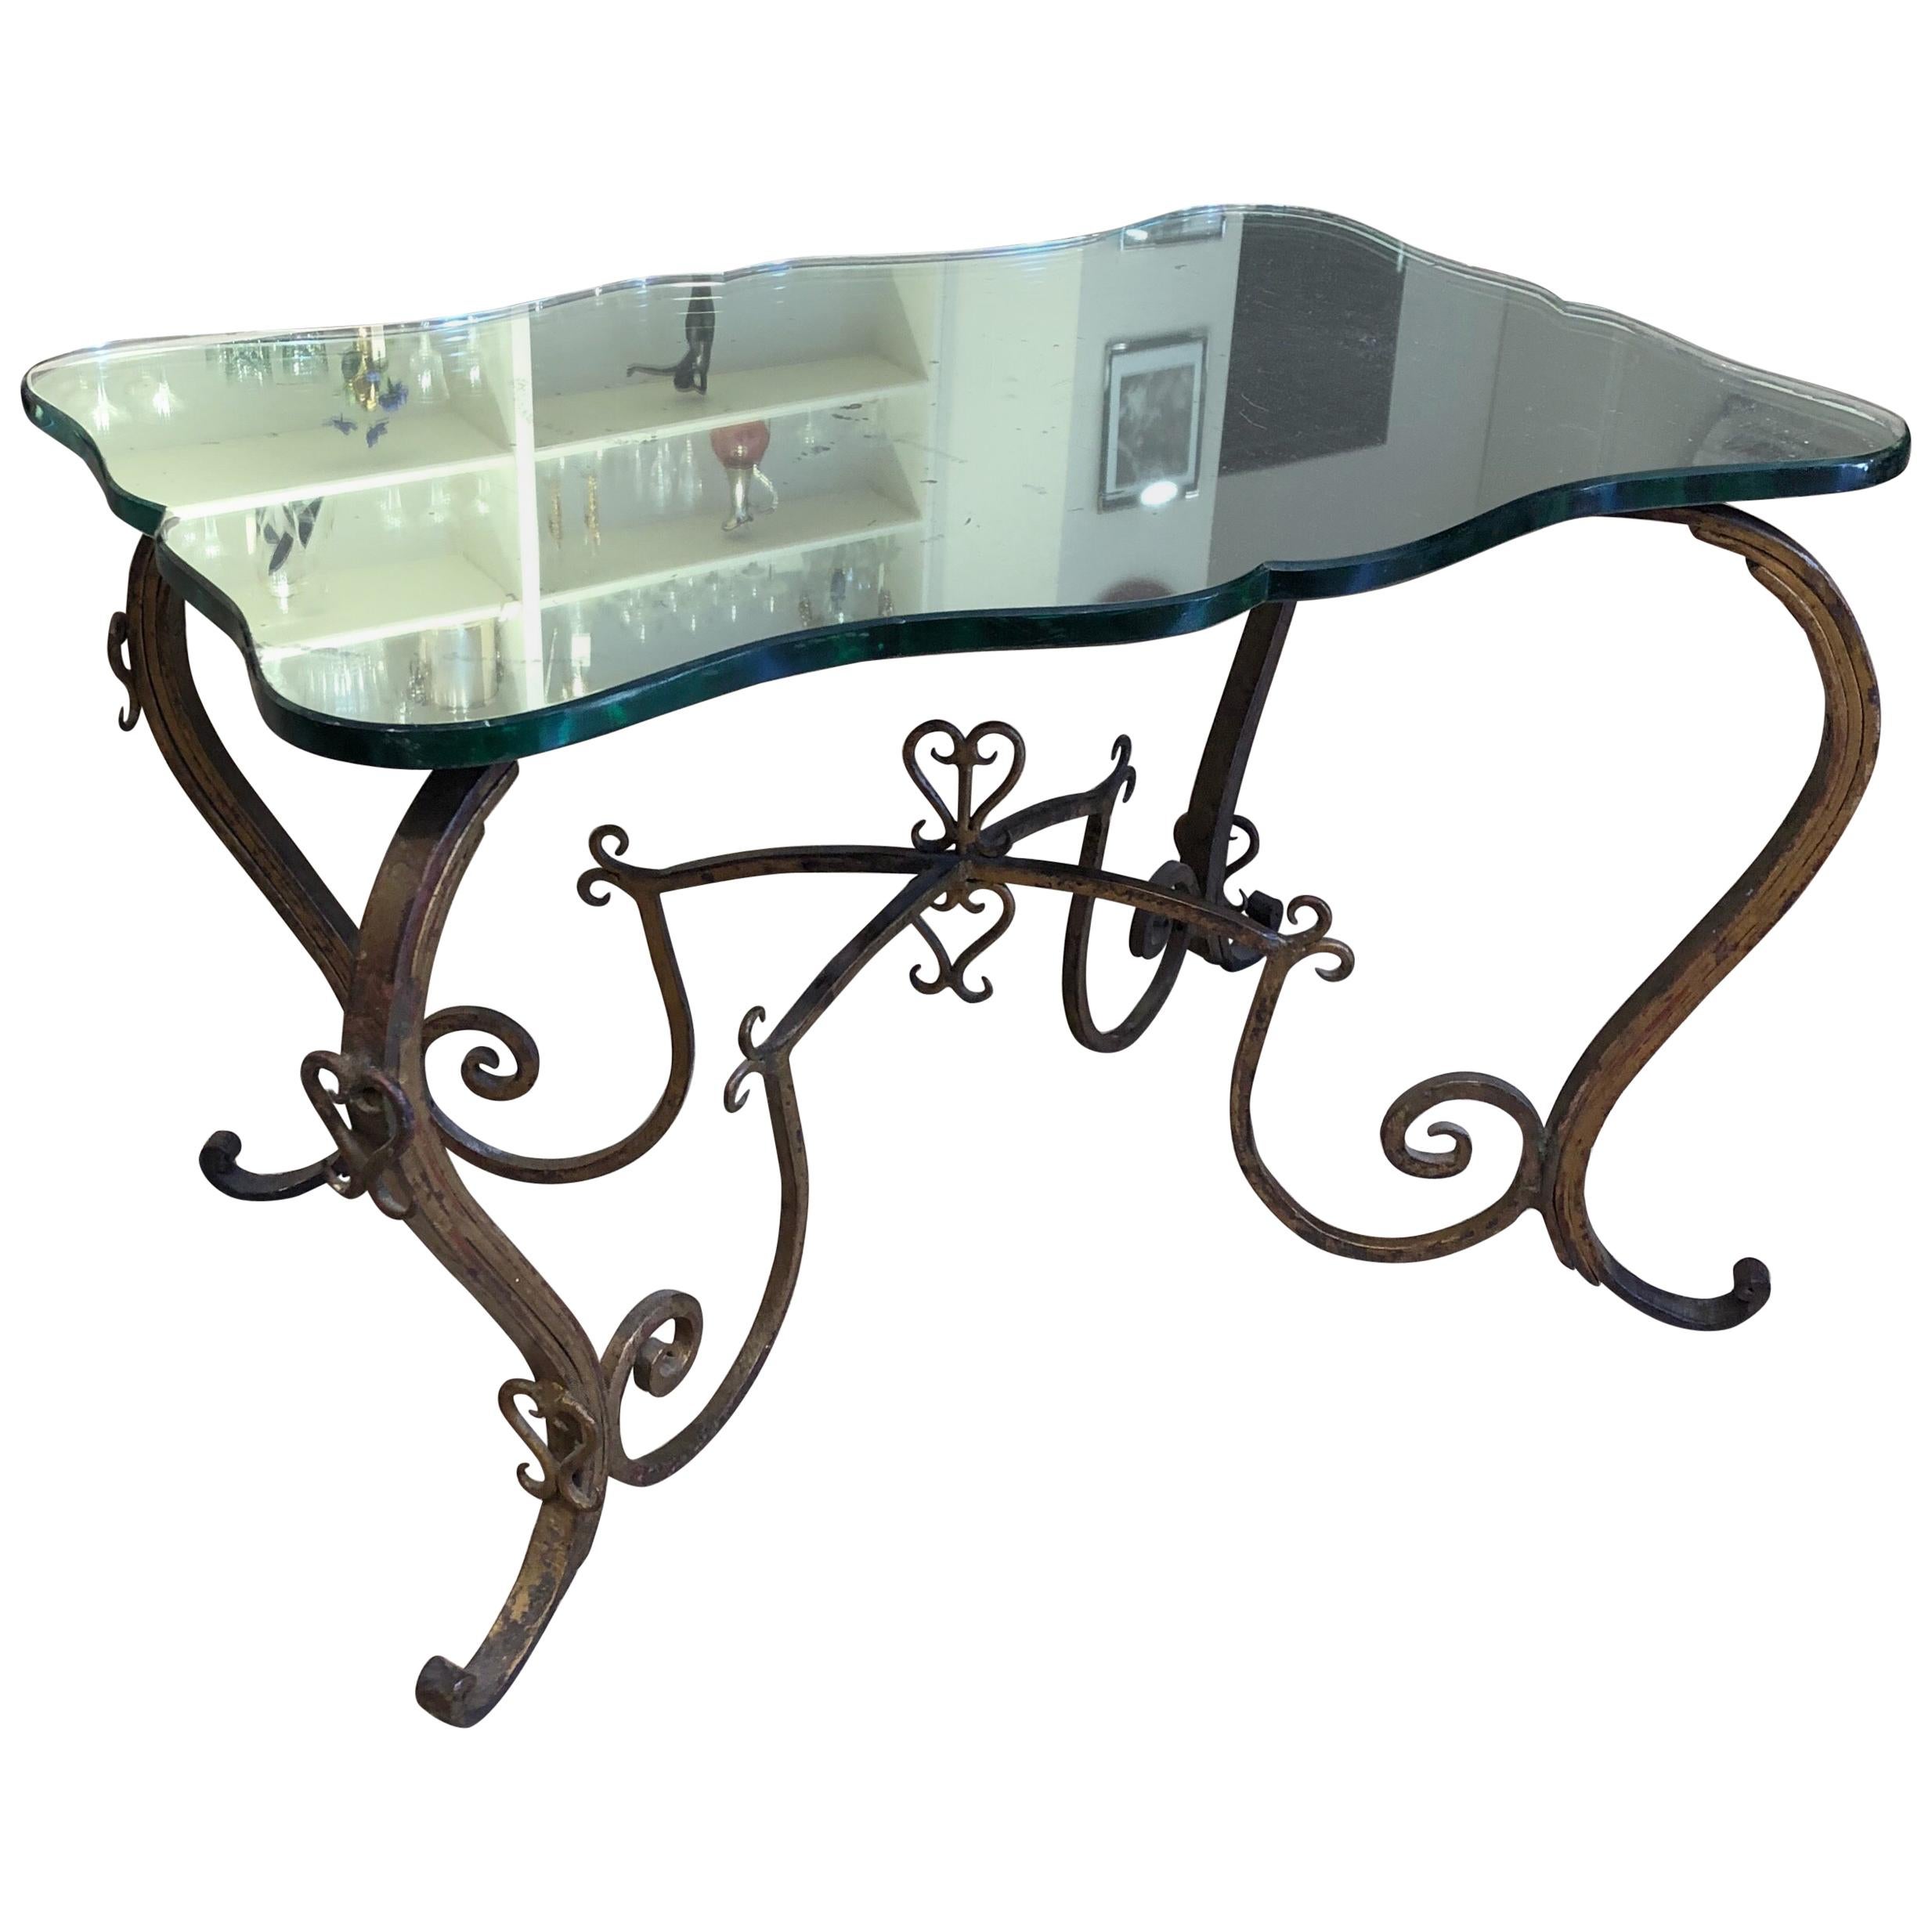 Rene Drouet Hand Forged Guilded Metal Table with Original Mirrored Glass Top